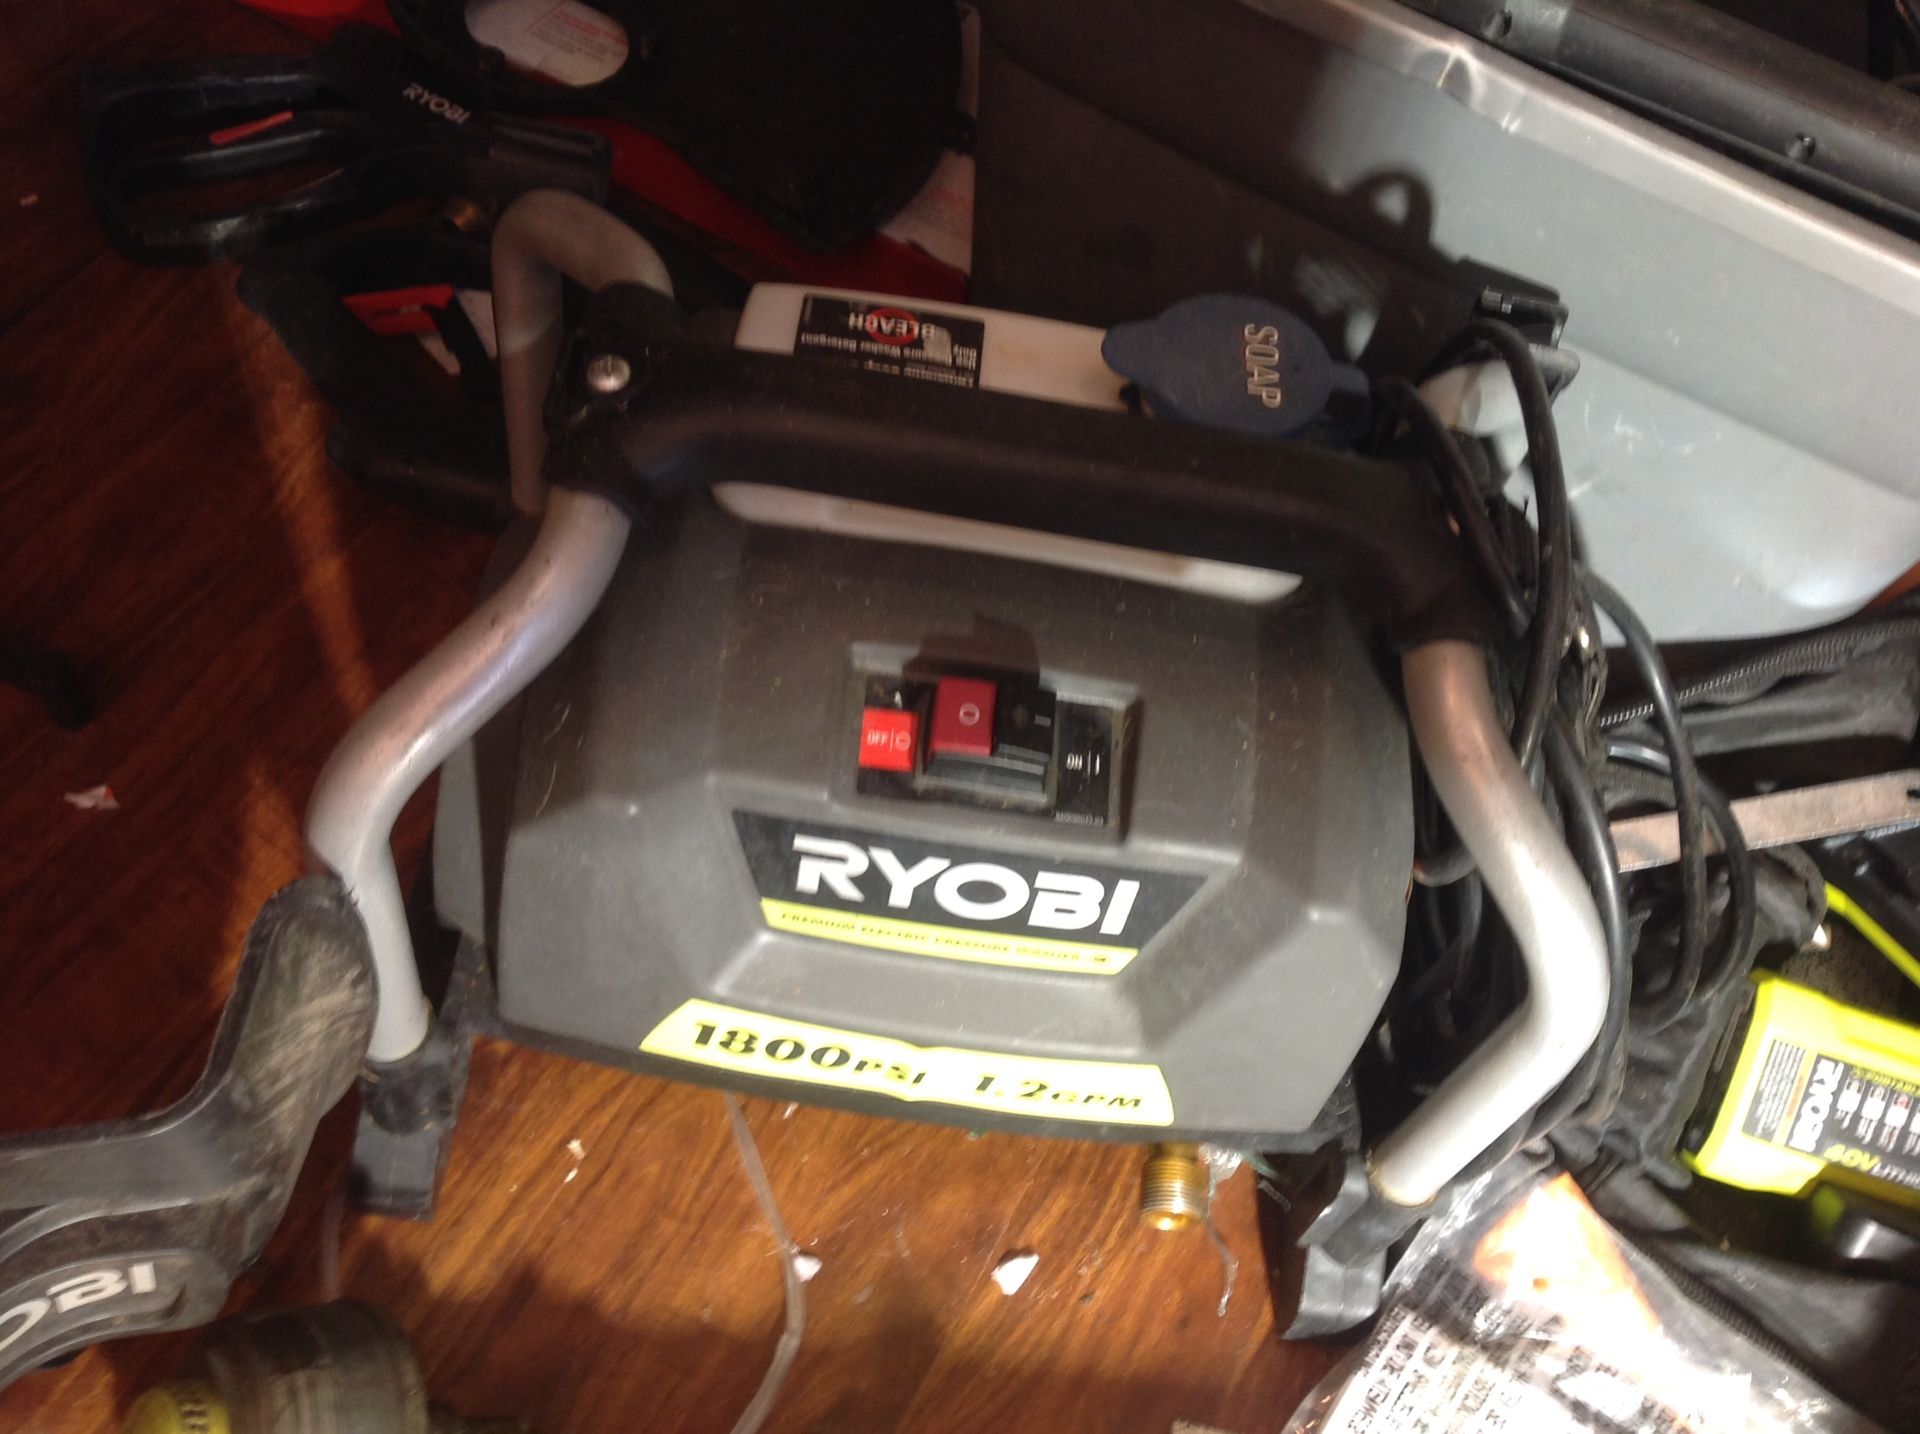 Ryobi 1800PSI Pressure washer set with guns and 2 nozzles, only $75